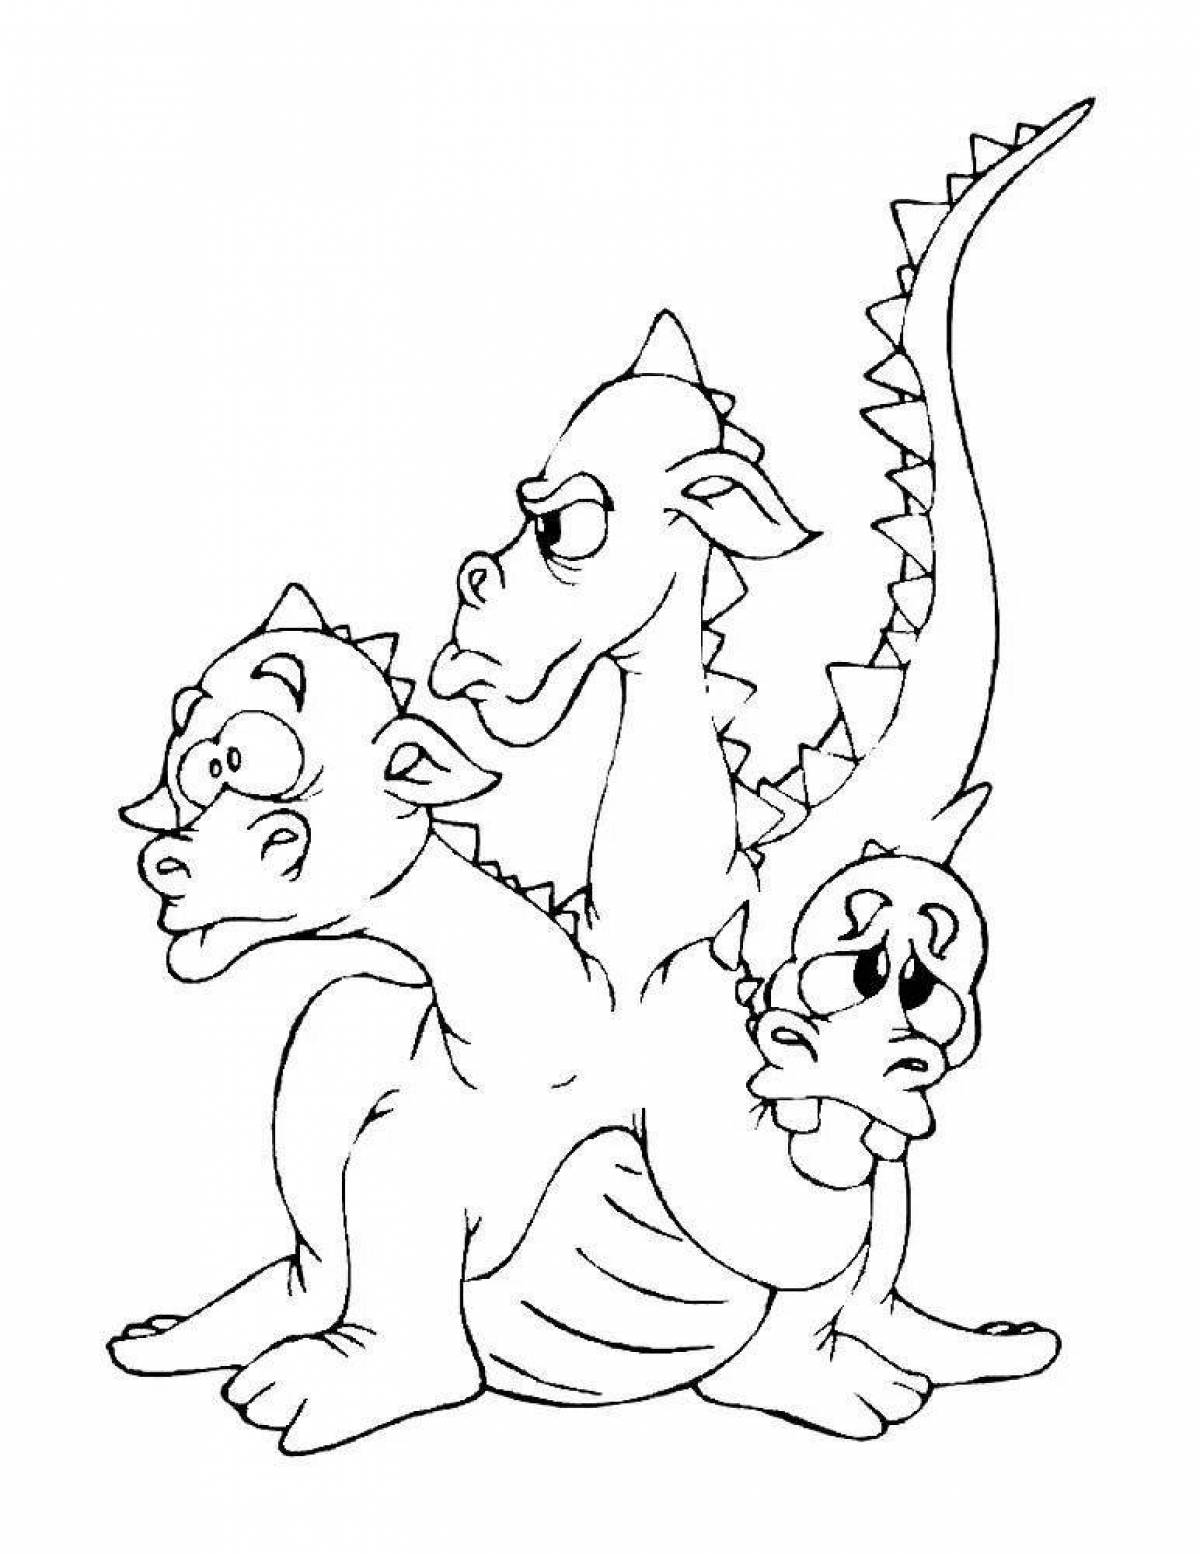 Colorful dragon coloring page